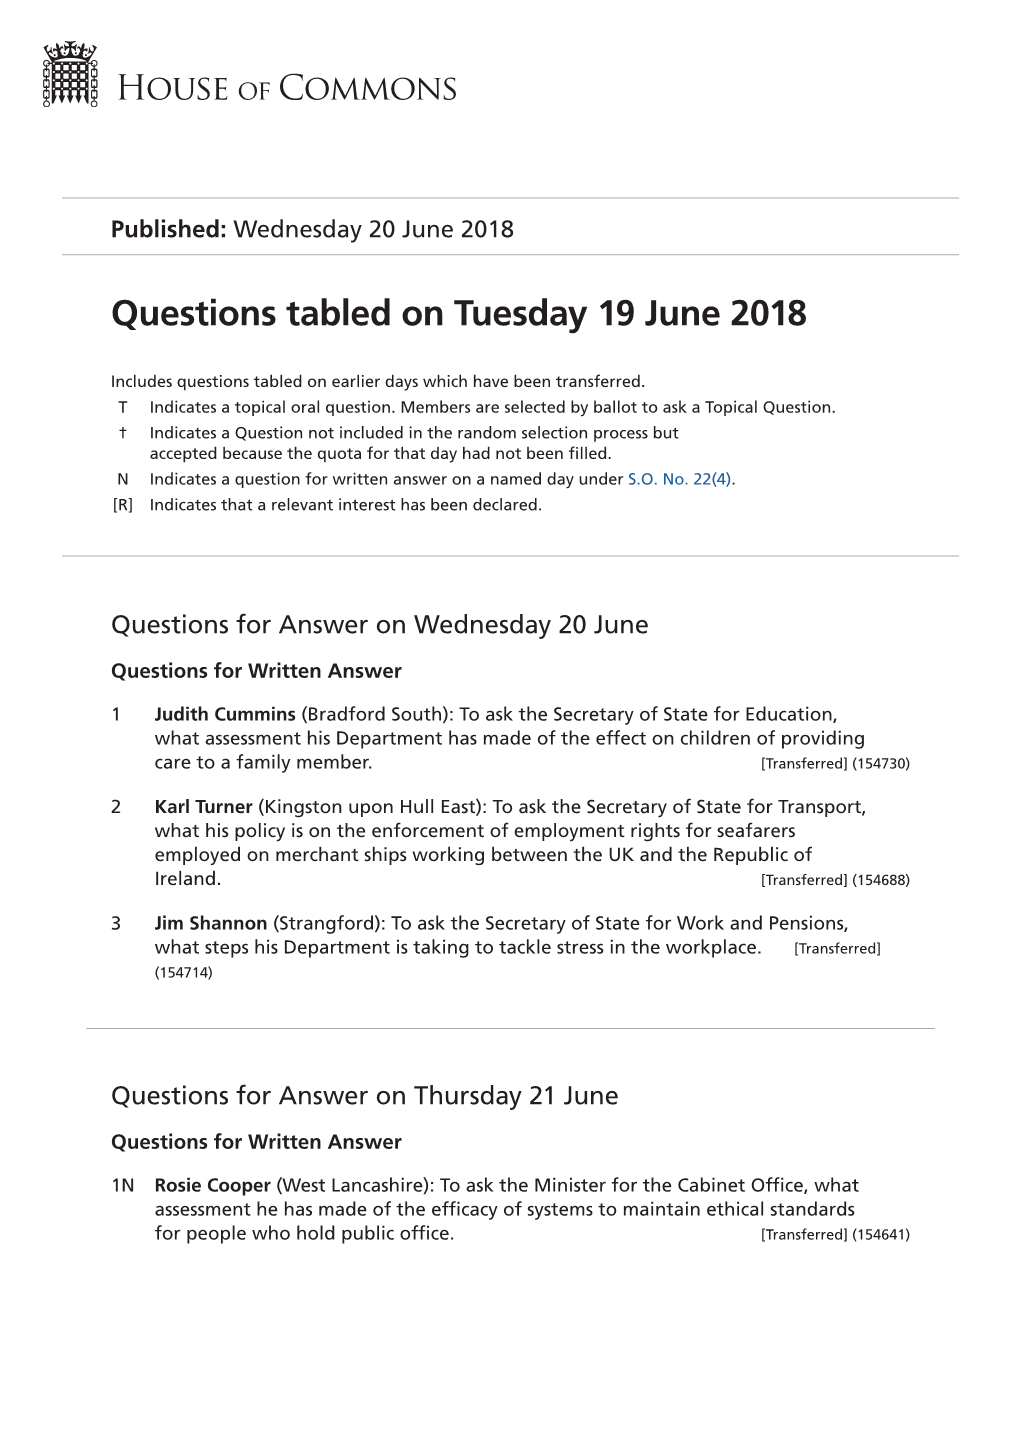 Questions Tabled on Tue 19 Jun 2018